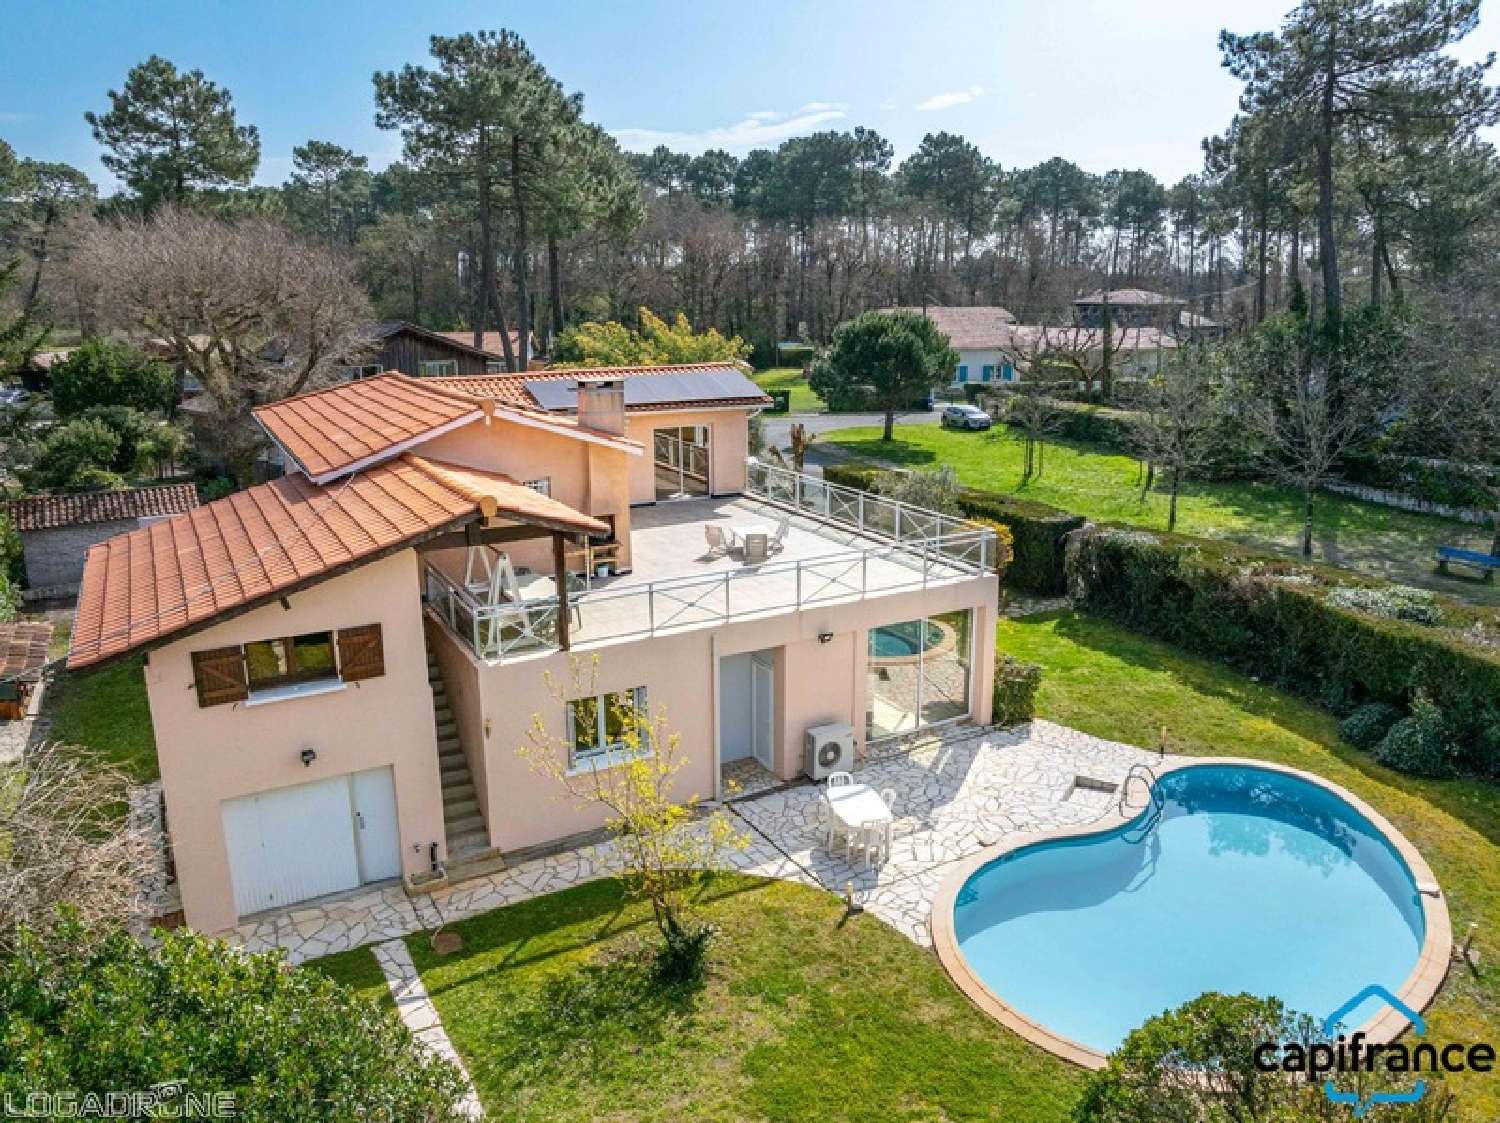  for sale house Andernos-les-Bains Gironde 5